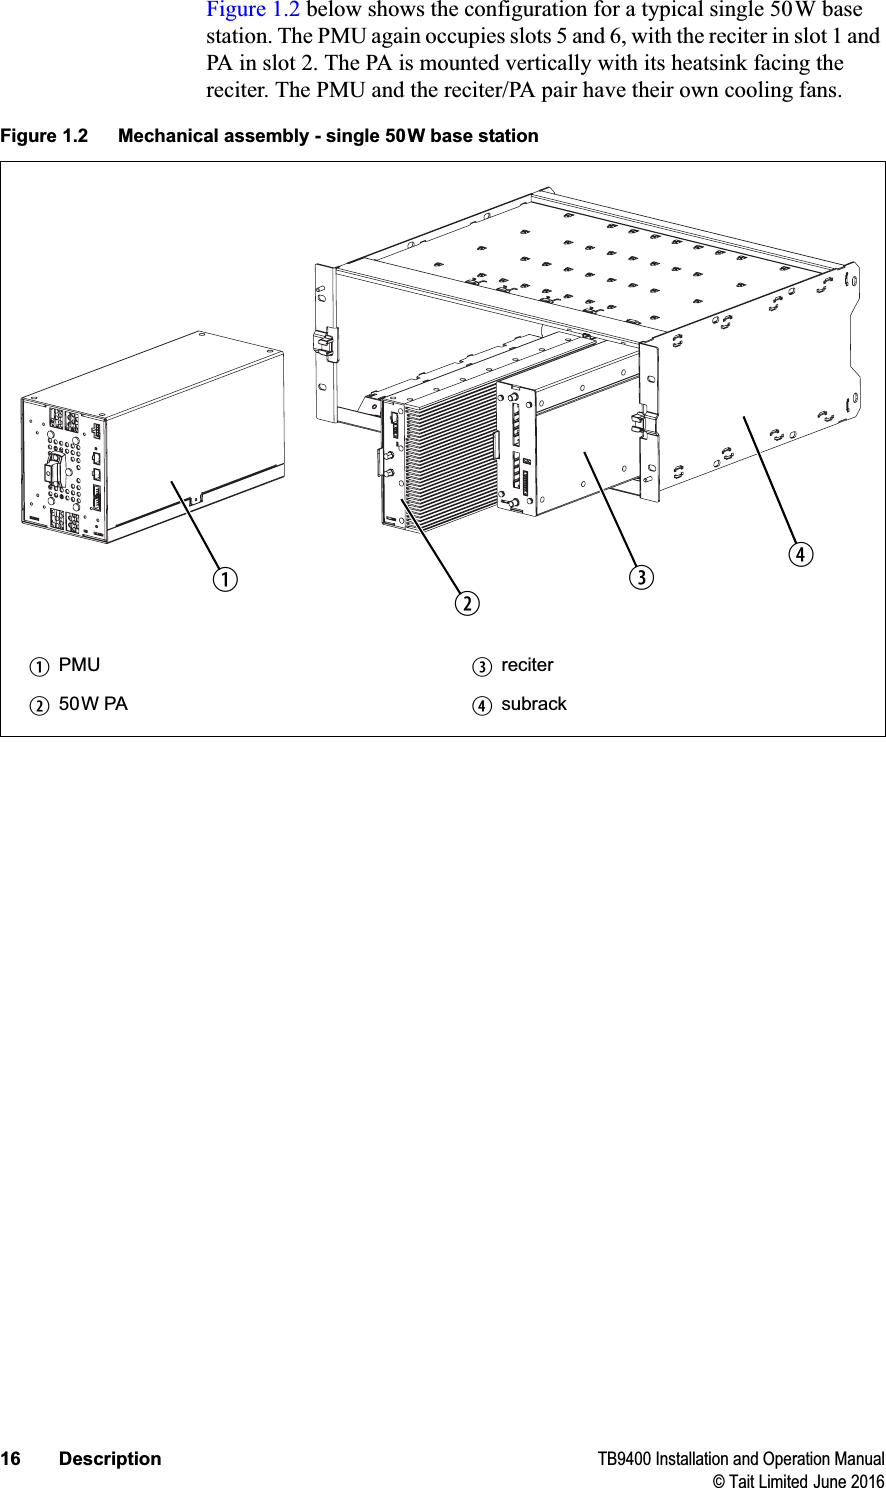 16 Description TB9400 Installation and Operation Manual© Tait Limited June 2016Figure 1.2 below shows the configuration for a typical single 50W base station. The PMU again occupies slots 5 and 6, with the reciter in slot 1 and PA in slot 2. The PA is mounted vertically with its heatsink facing the reciter. The PMU and the reciter/PA pair have their own cooling fans.Figure 1.2 Mechanical assembly - single 50W base stationbPMU dreciterc50W PA esubrackbcde